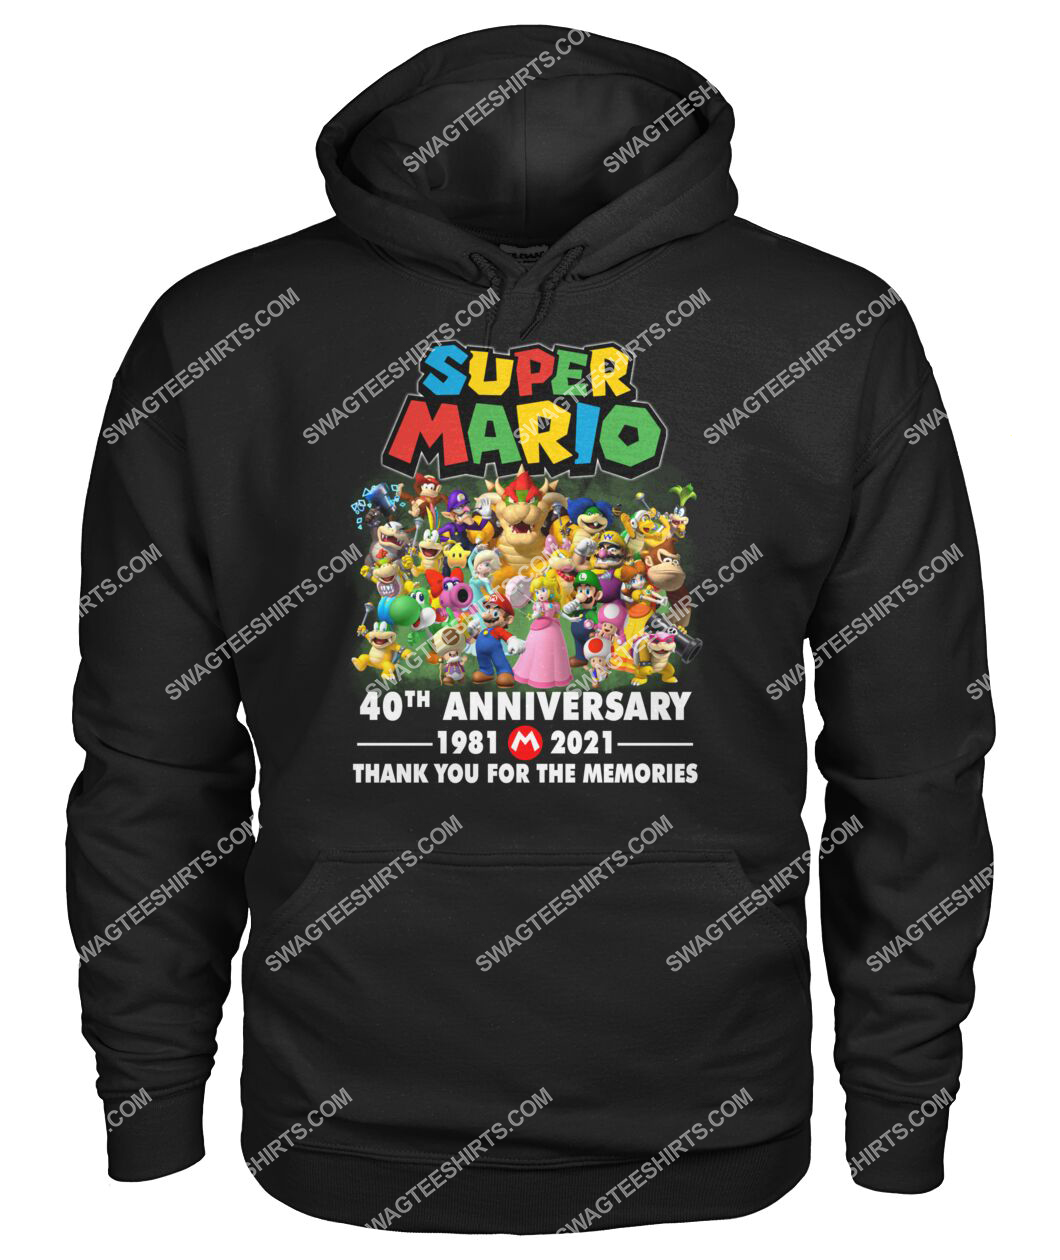 super mario 40th anniversary thank you for the memories hoodie 1